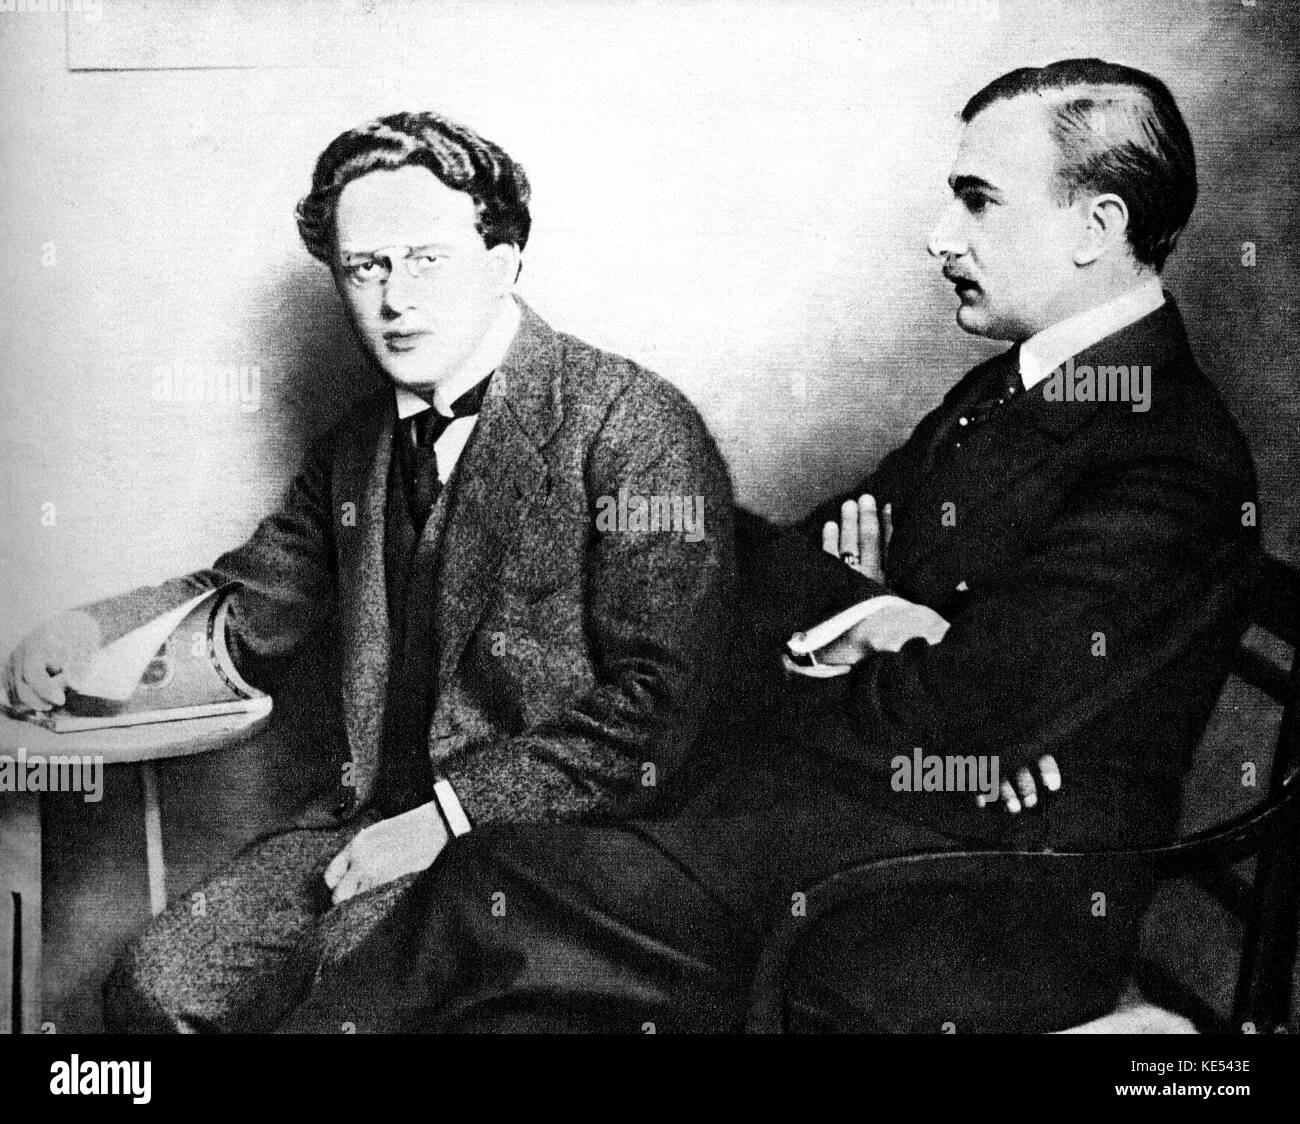 Szymanowski, Karol (right of pic) - portrait 1912 with  Grzegorz Fitelberg.    Polish composer, 6 October 1882 - 28 March 1937.  G  F: Polish conductor, violinist and composer October 18, 1879 - June 10, 1953 . Stock Photo